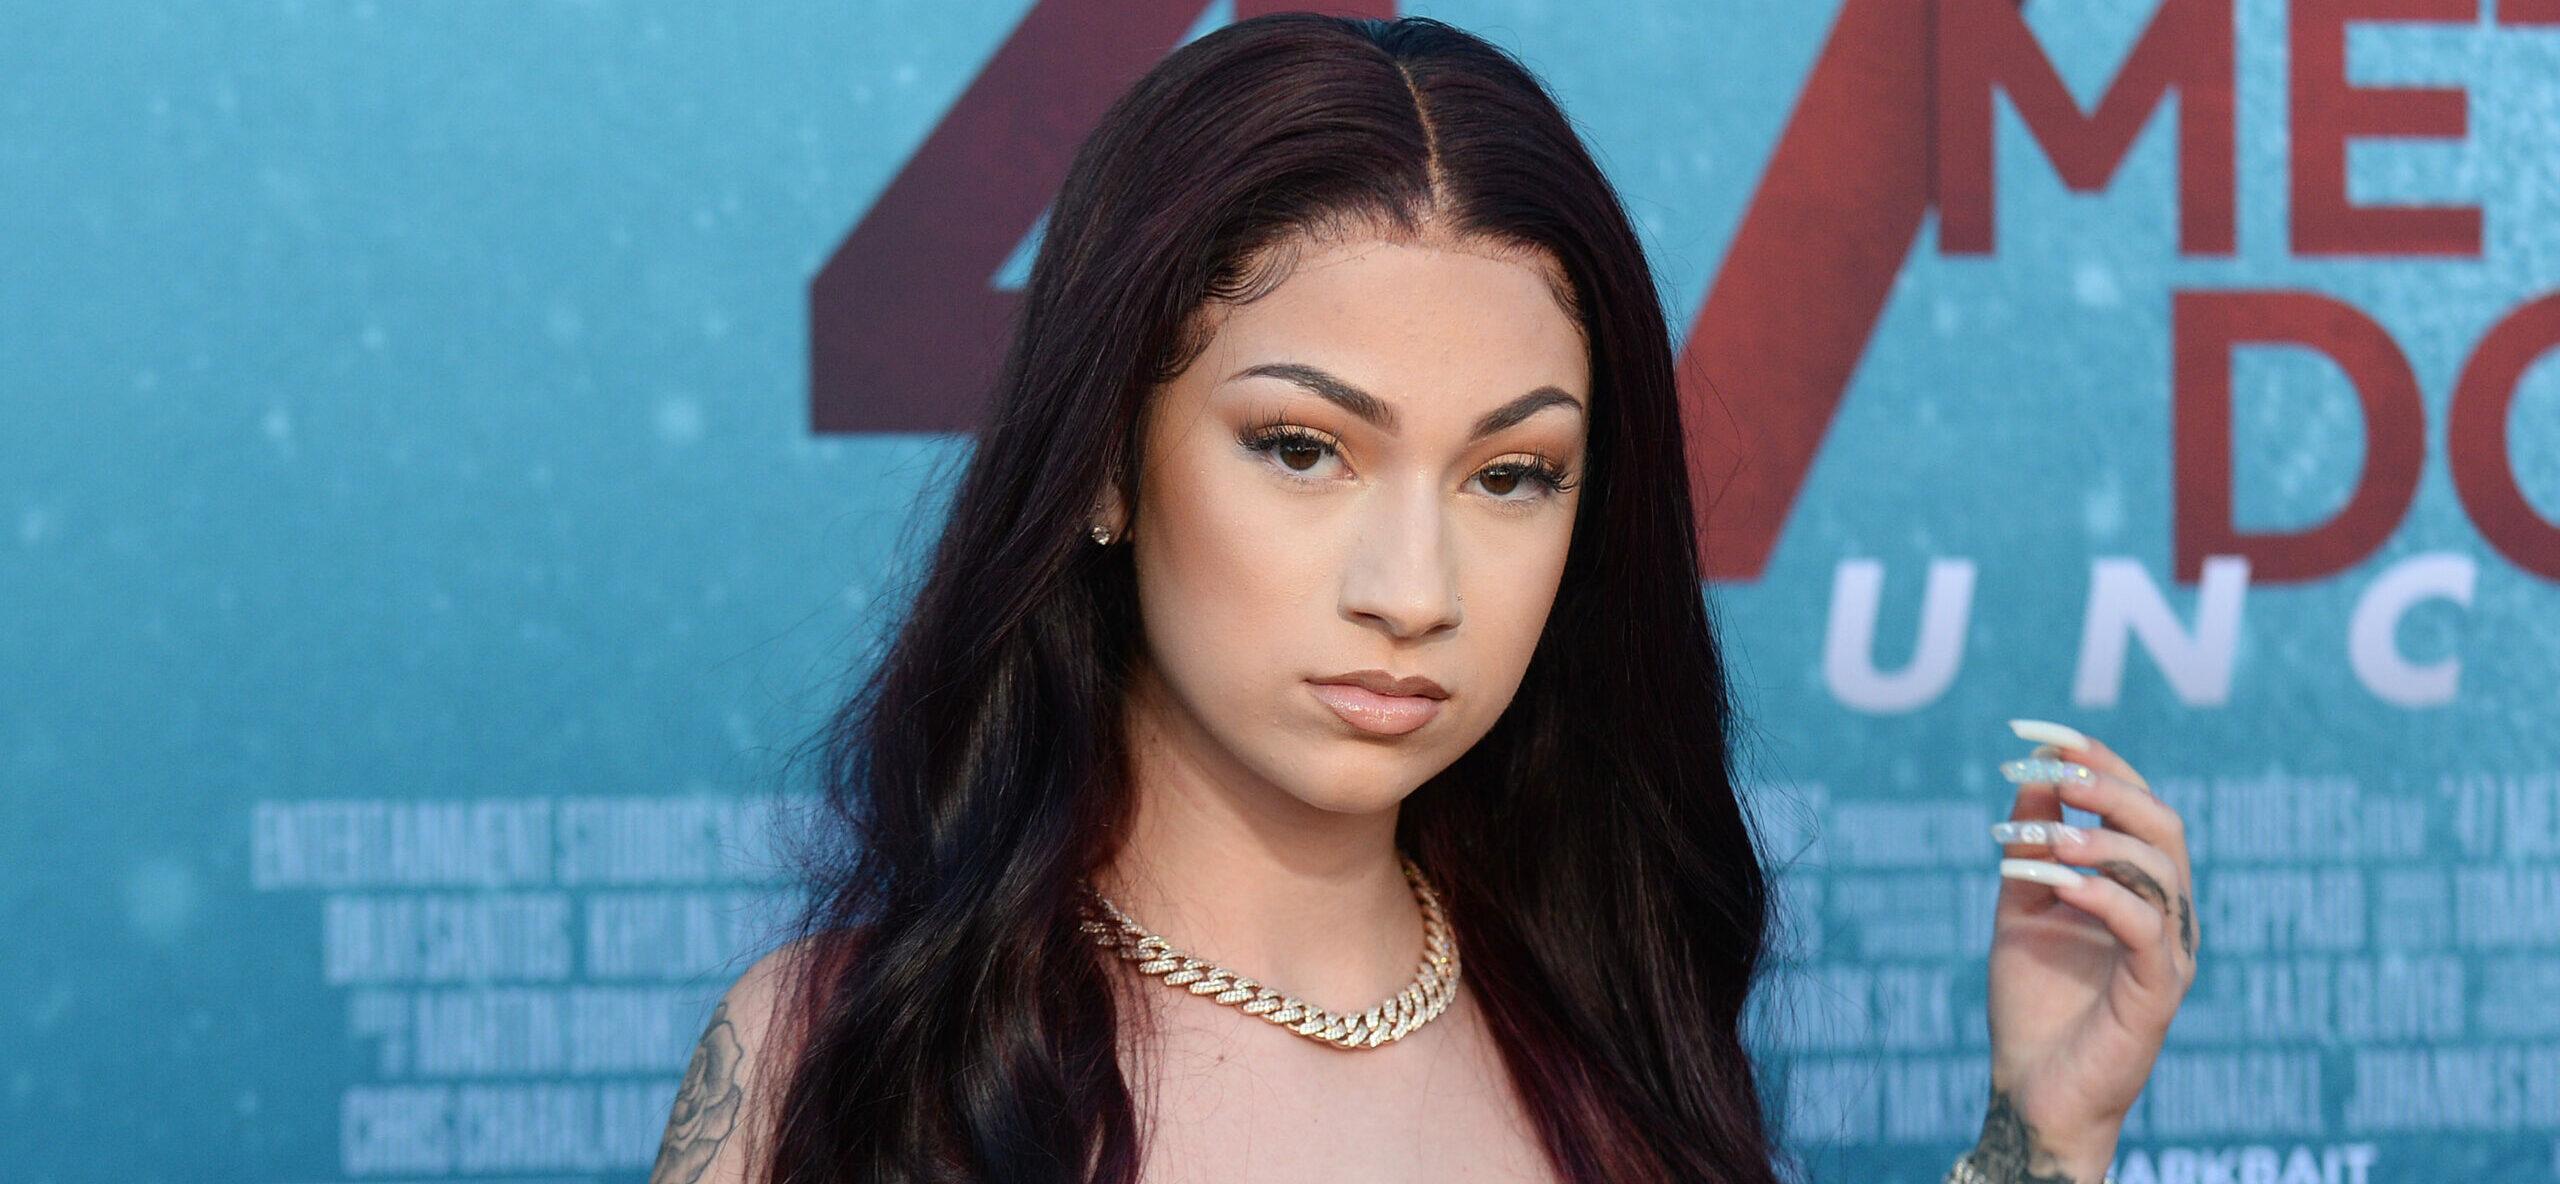 47 Meters Down: Uncaged - Los Angeles Premiere. 13 Aug 2019 Pictured: Danielle Bregoli aka Bhad Bhabie.